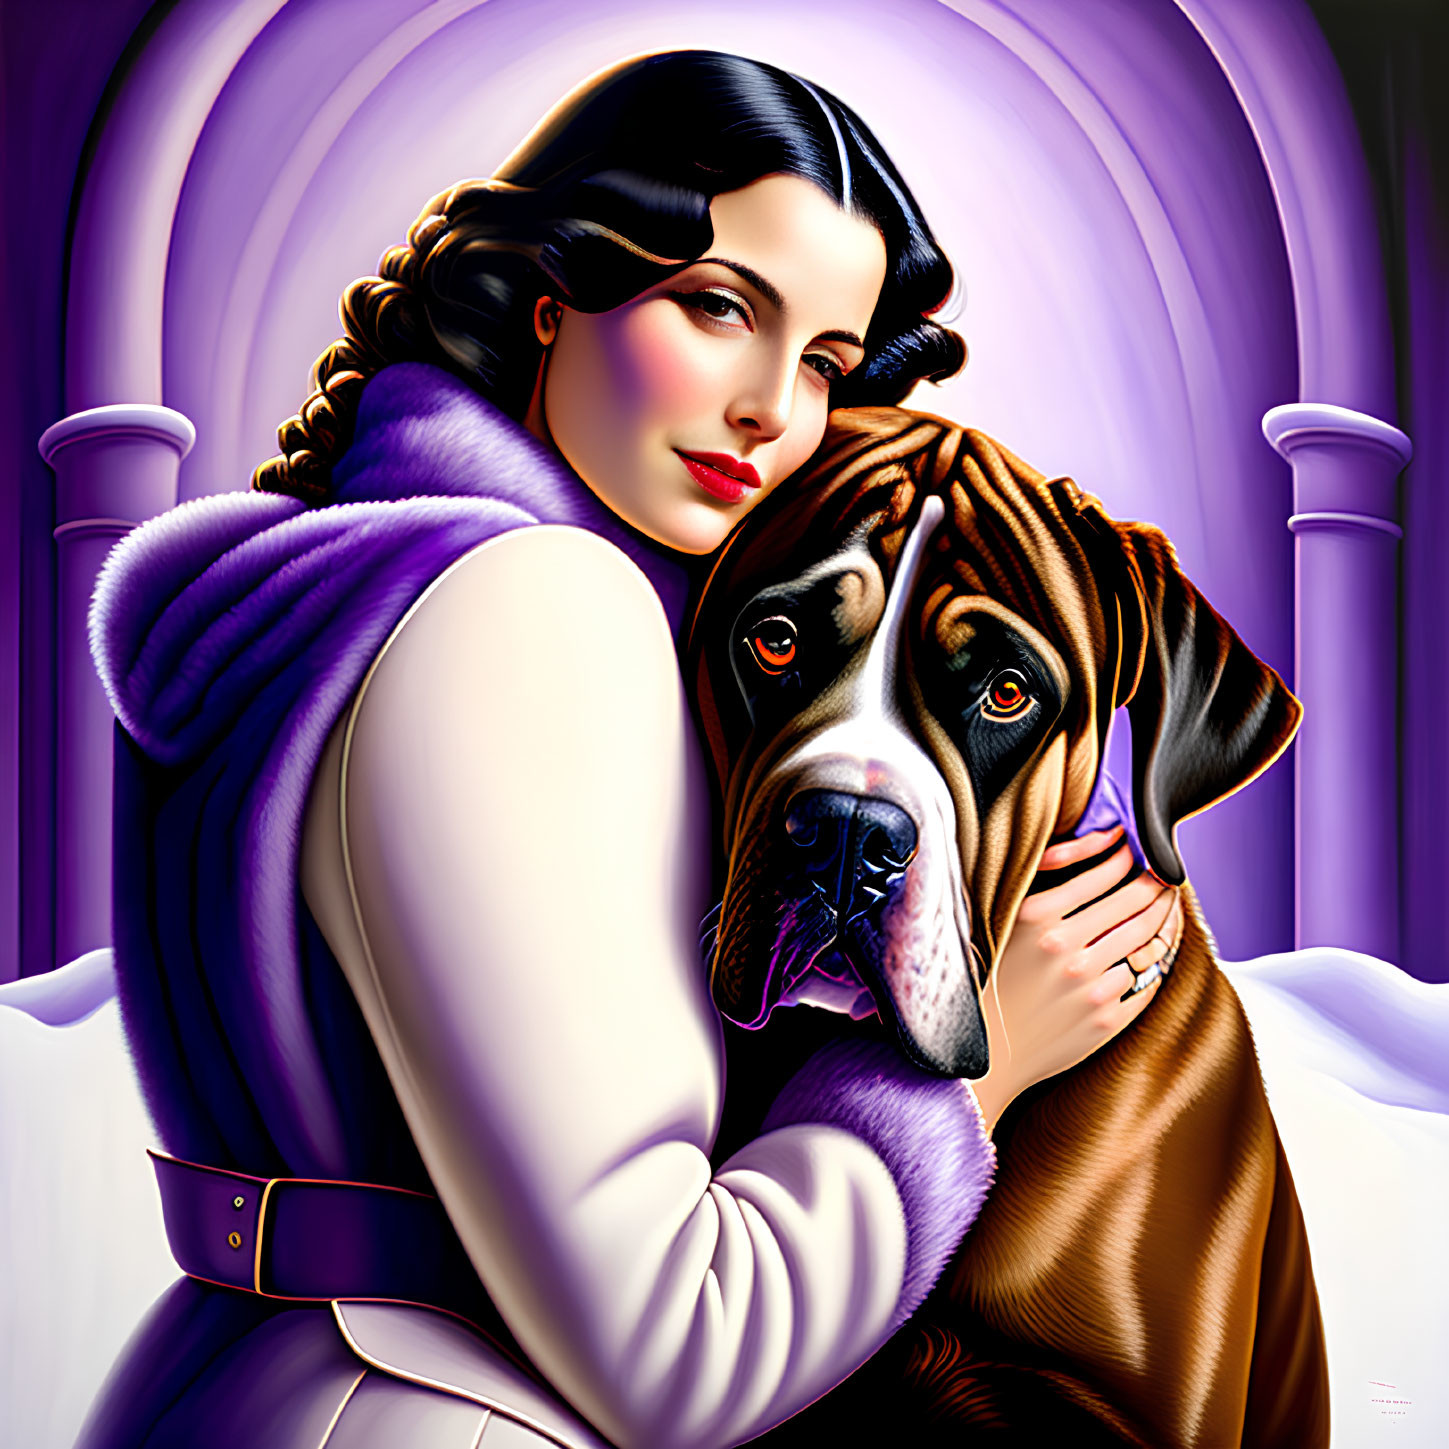 Illustration of woman with dark hair in violet outfit hugging dog under purple arch.